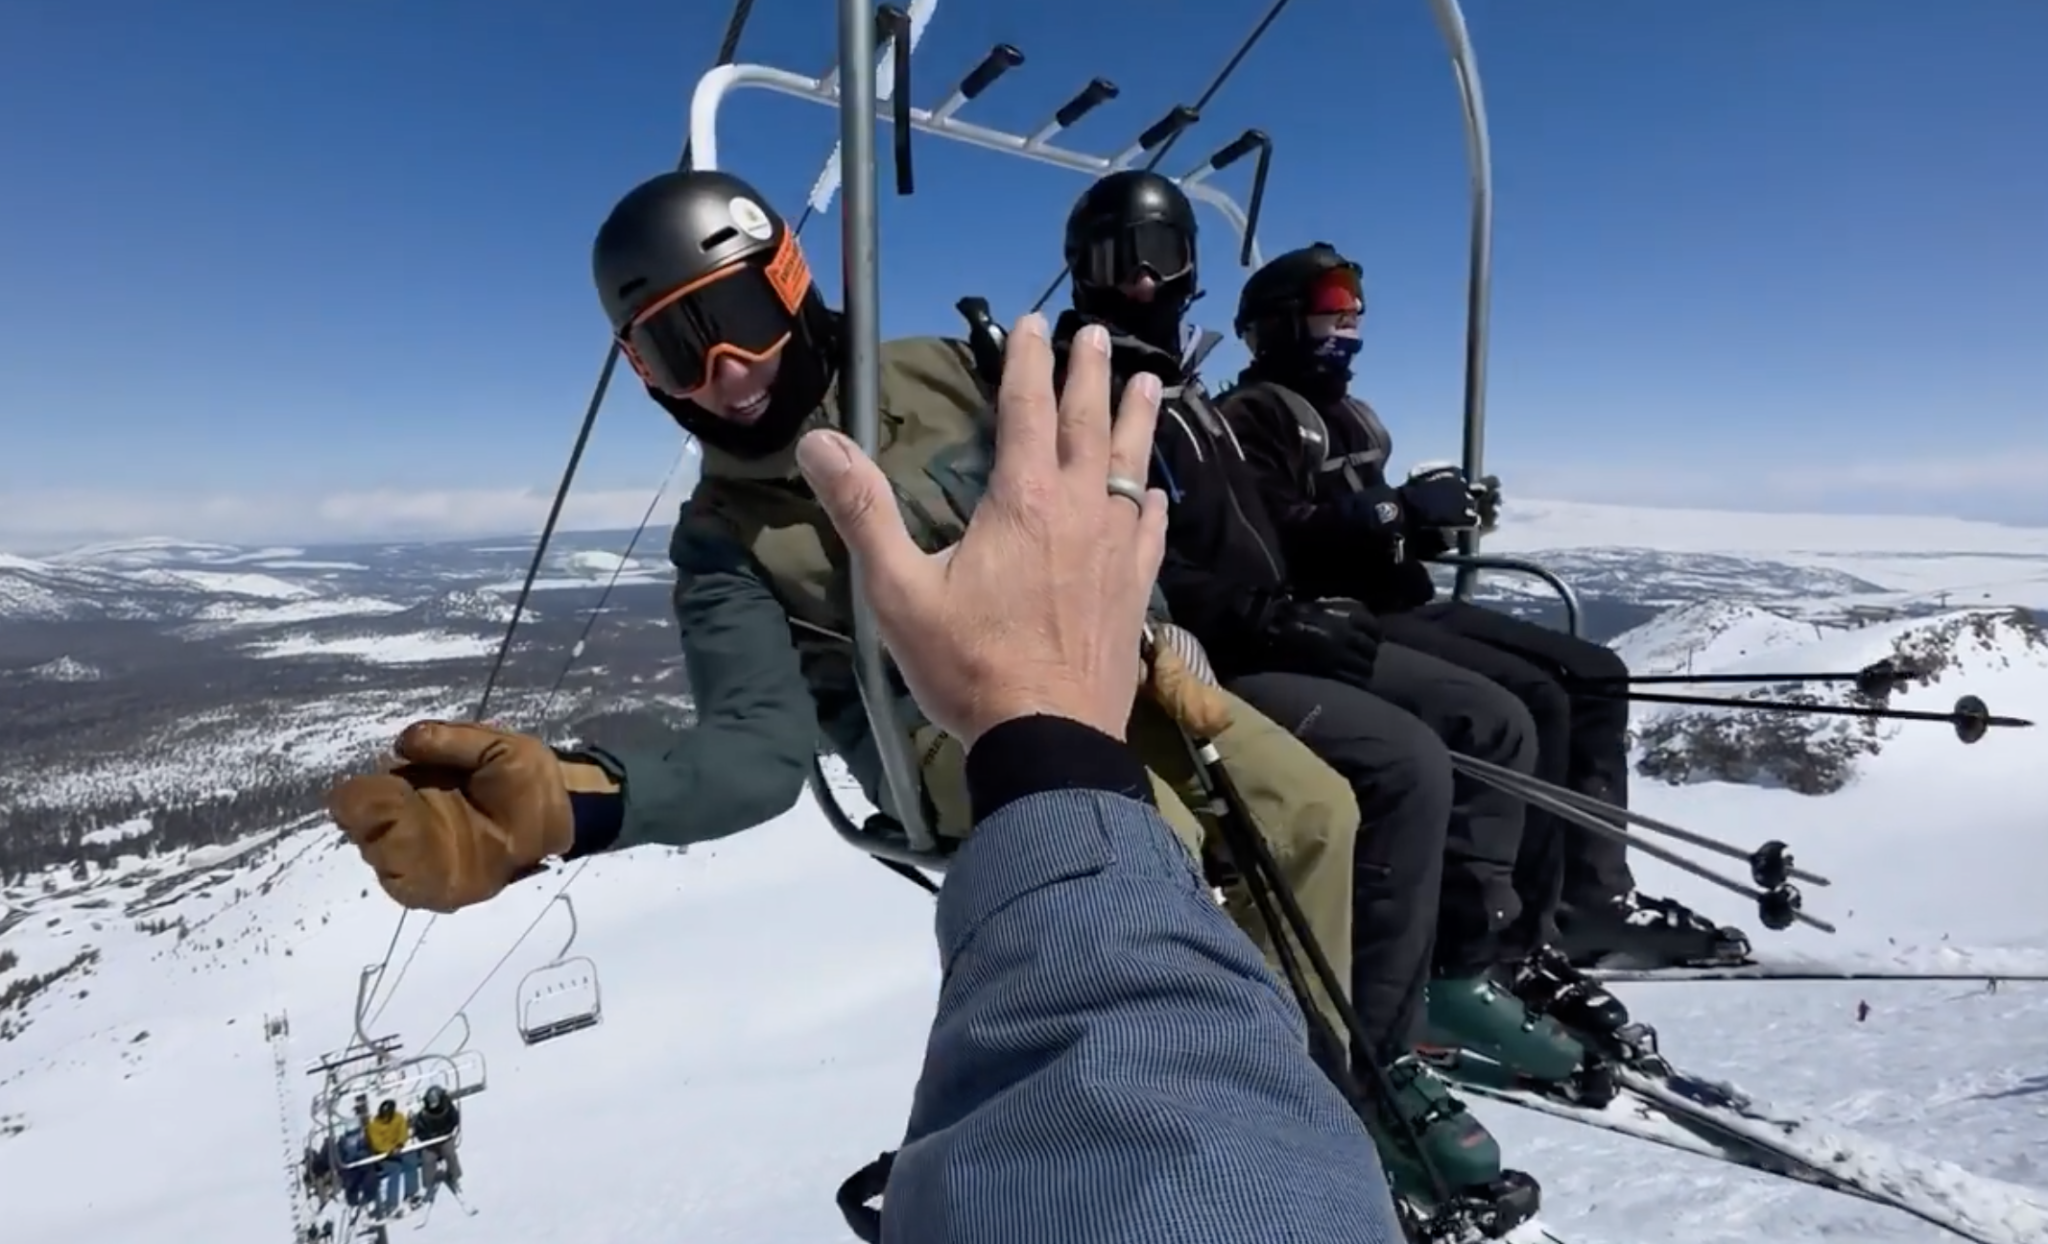 Hi Five on the Spine of Wipe Out and Chair23. Amazing how much snow there is here in Mammoth.... Photo from Rob Vuona